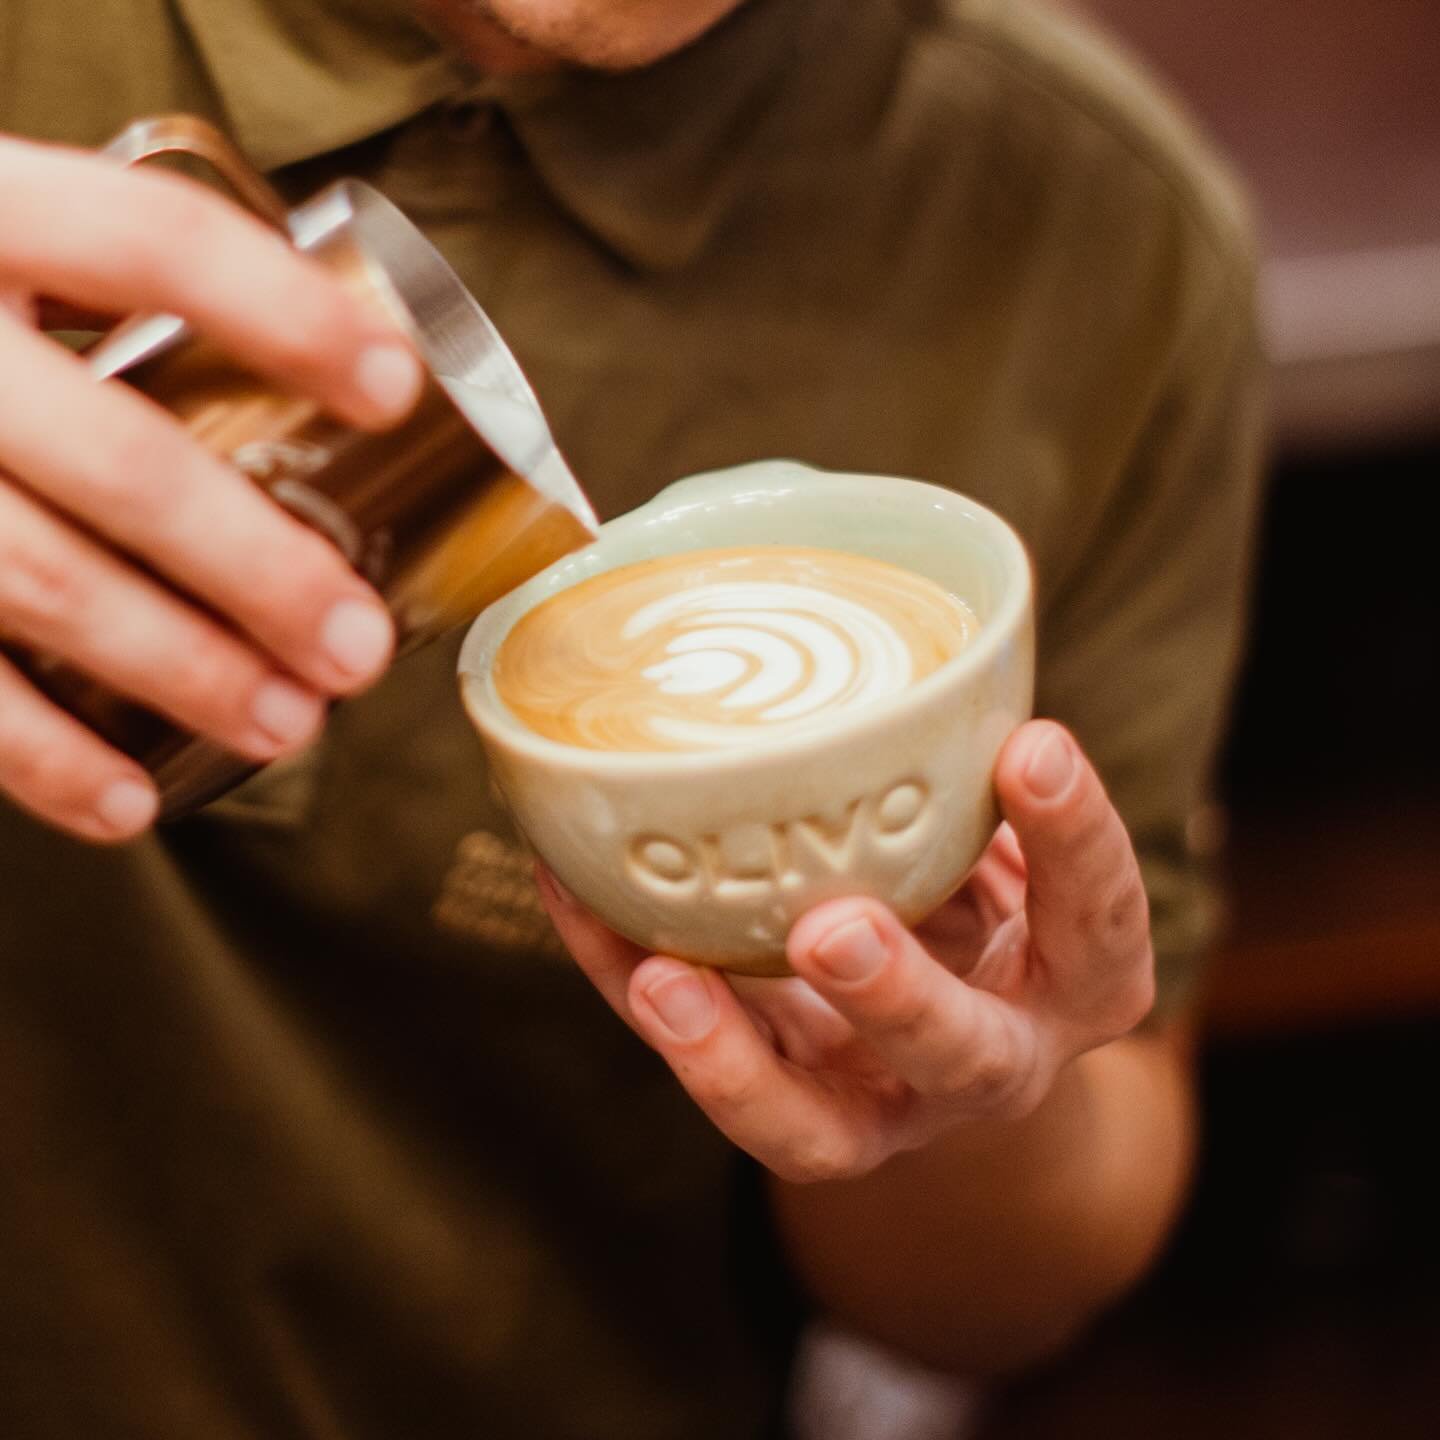 Back to work? Why rush things up? 

These holidays can get pretty exhausting to be honest, and after a lot of time spend draining our social batteries, it&rsquo;s time for a recovery. 

Have a moment for yourself, enjoy a cup of specialty coffee, let